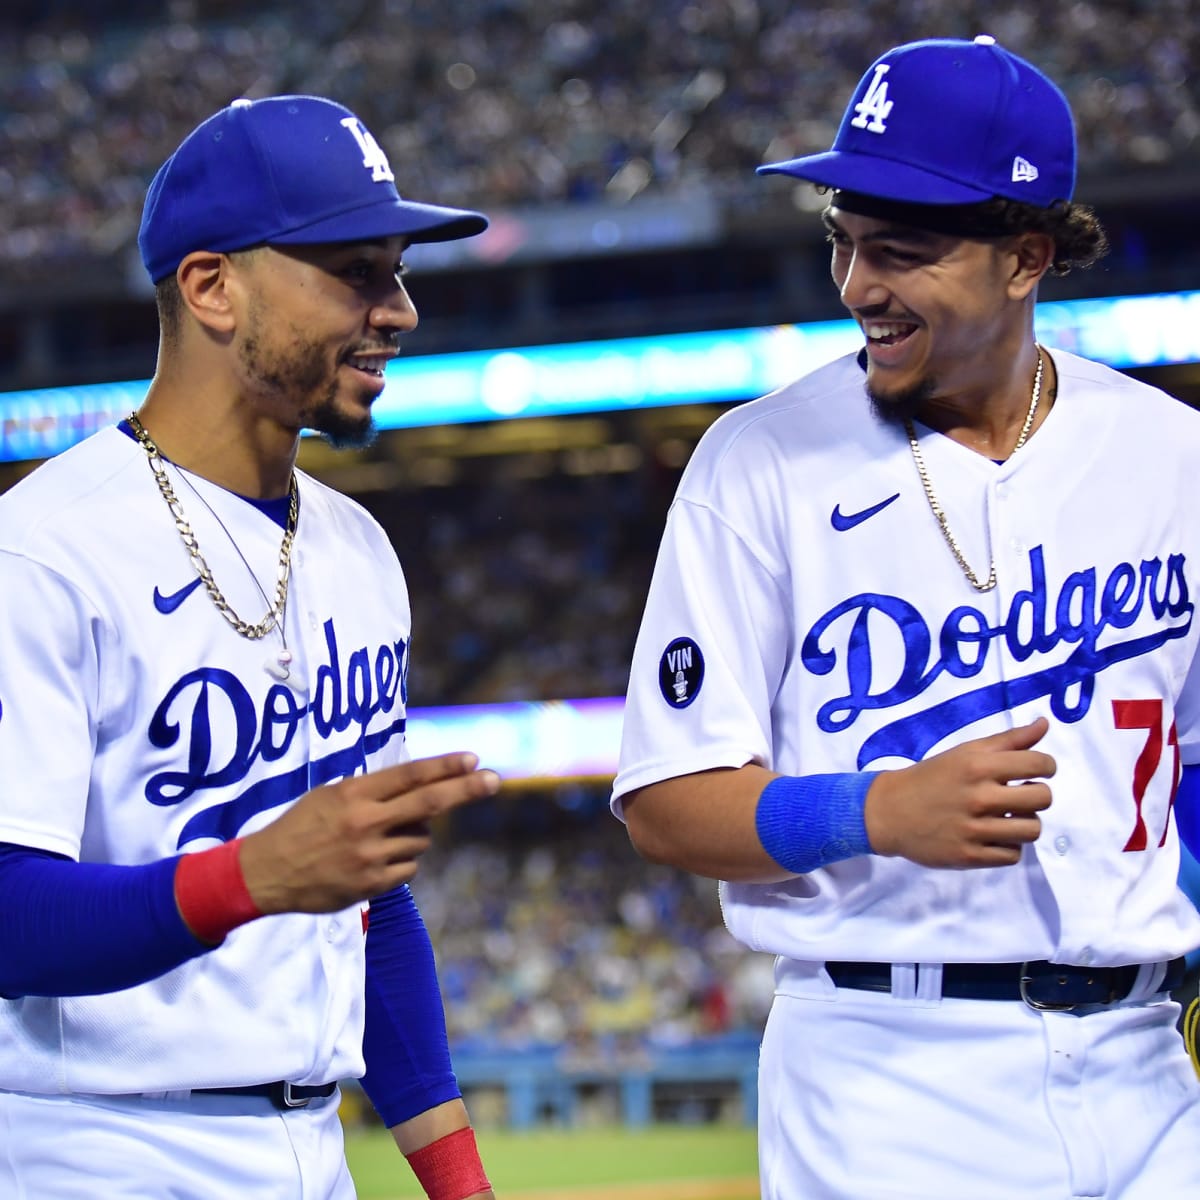 Best Dodgers players by uniform number